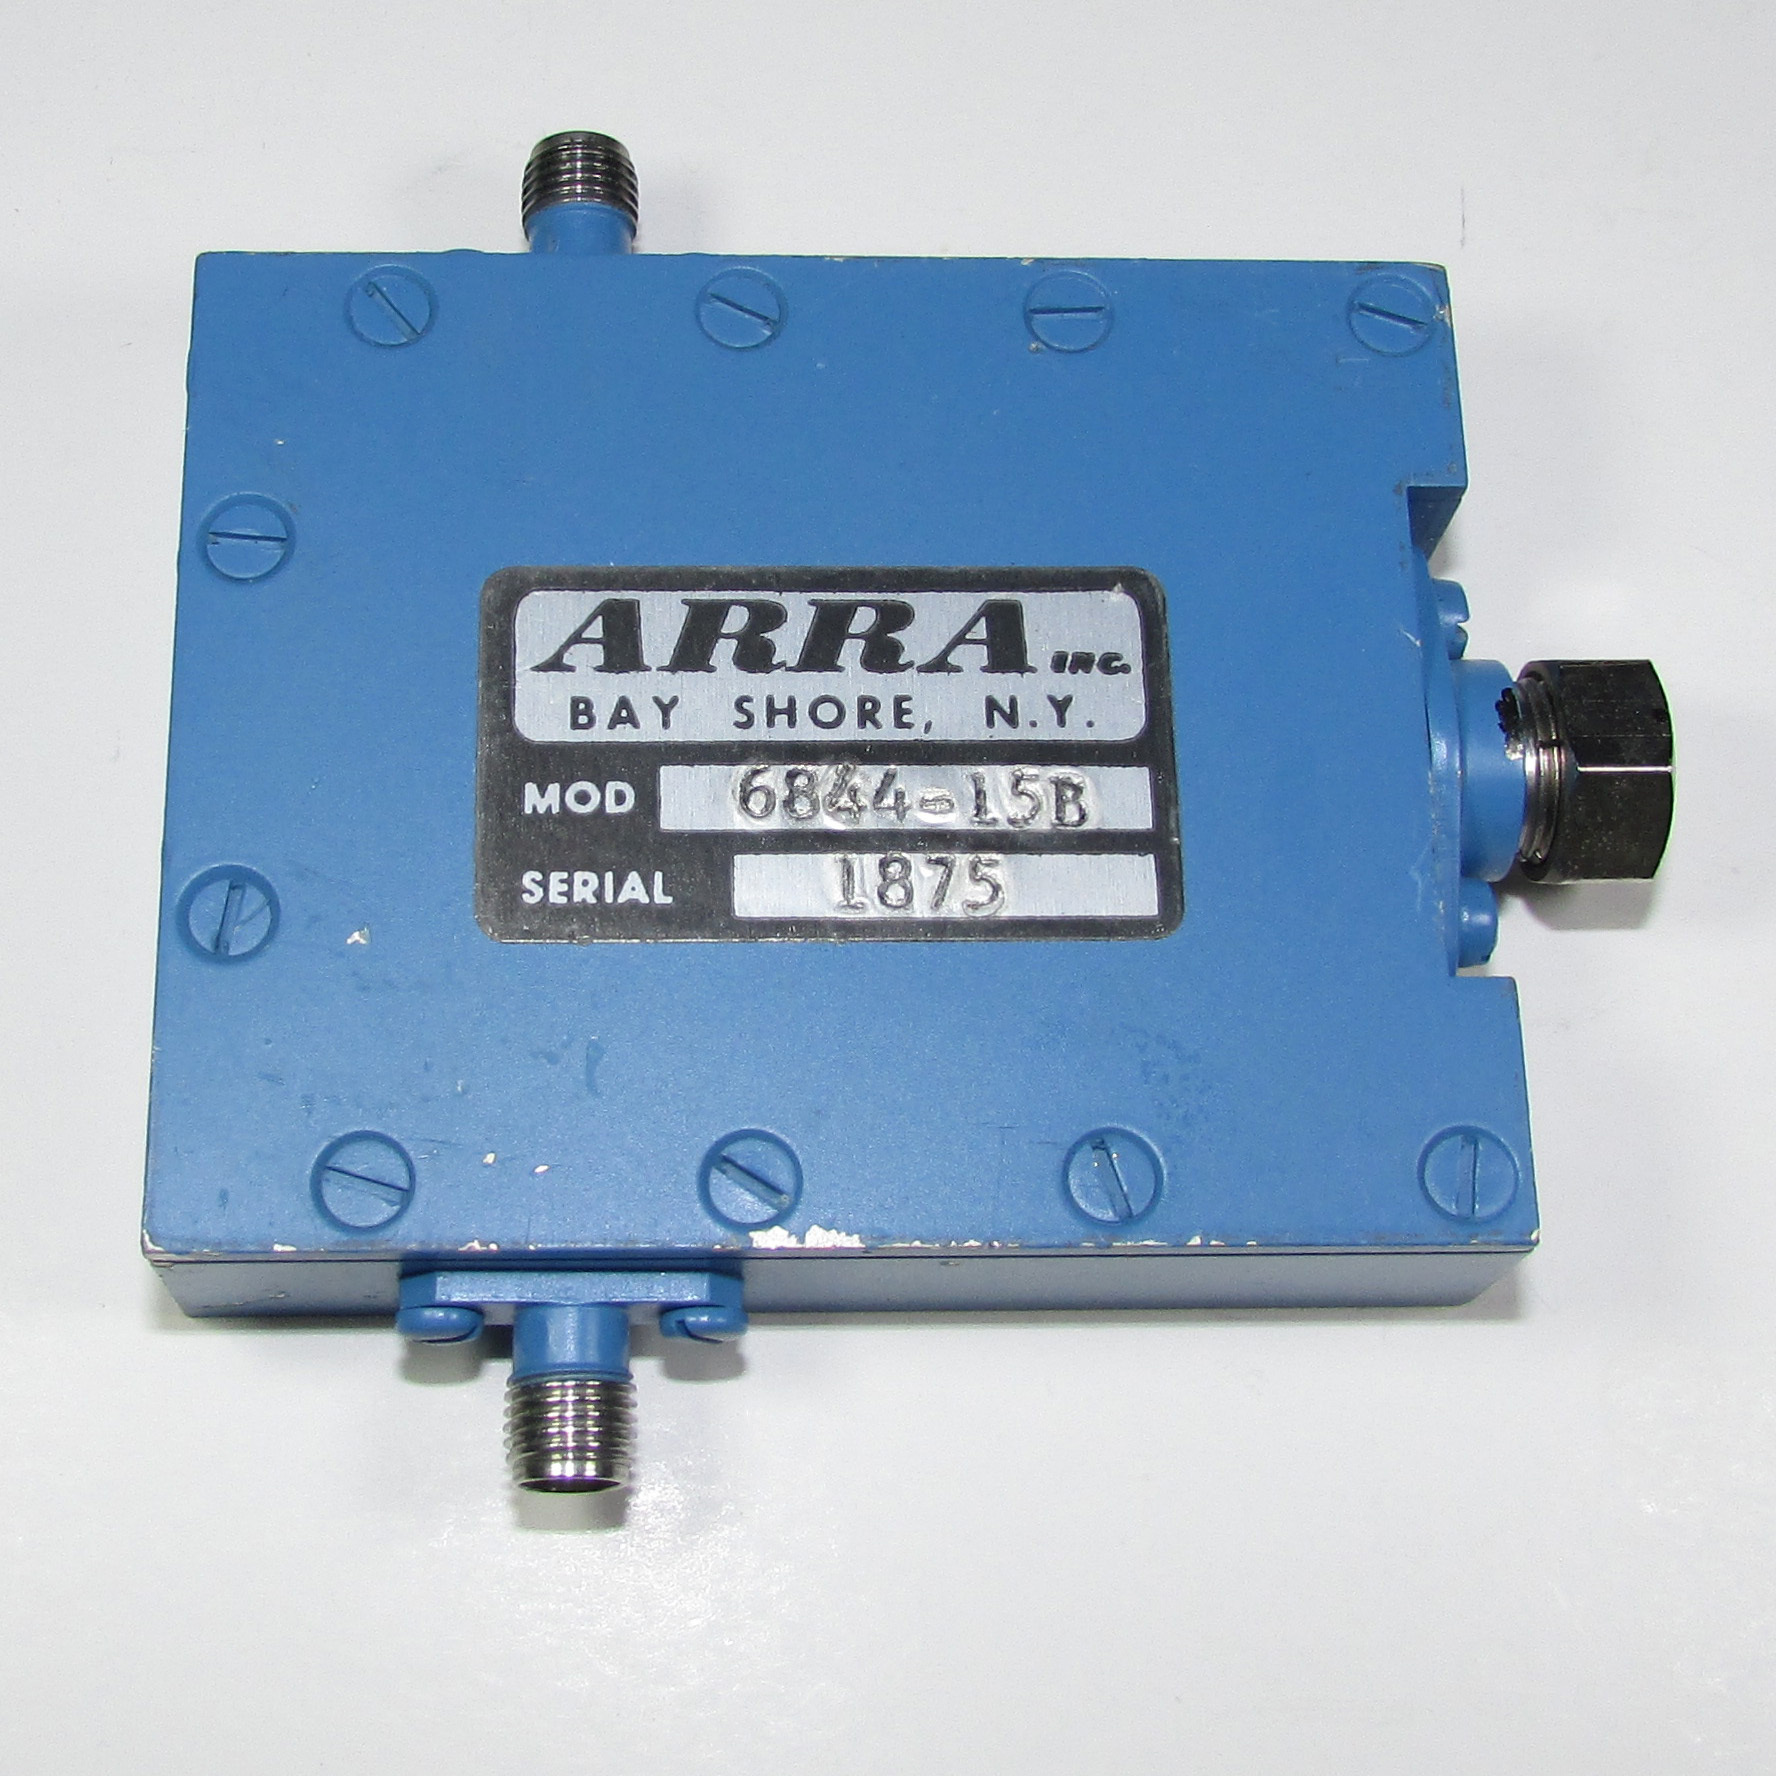 American ARRA 6844-15B 12-18GHz 0-70dB SMA microwave continuously adjustable attenuator